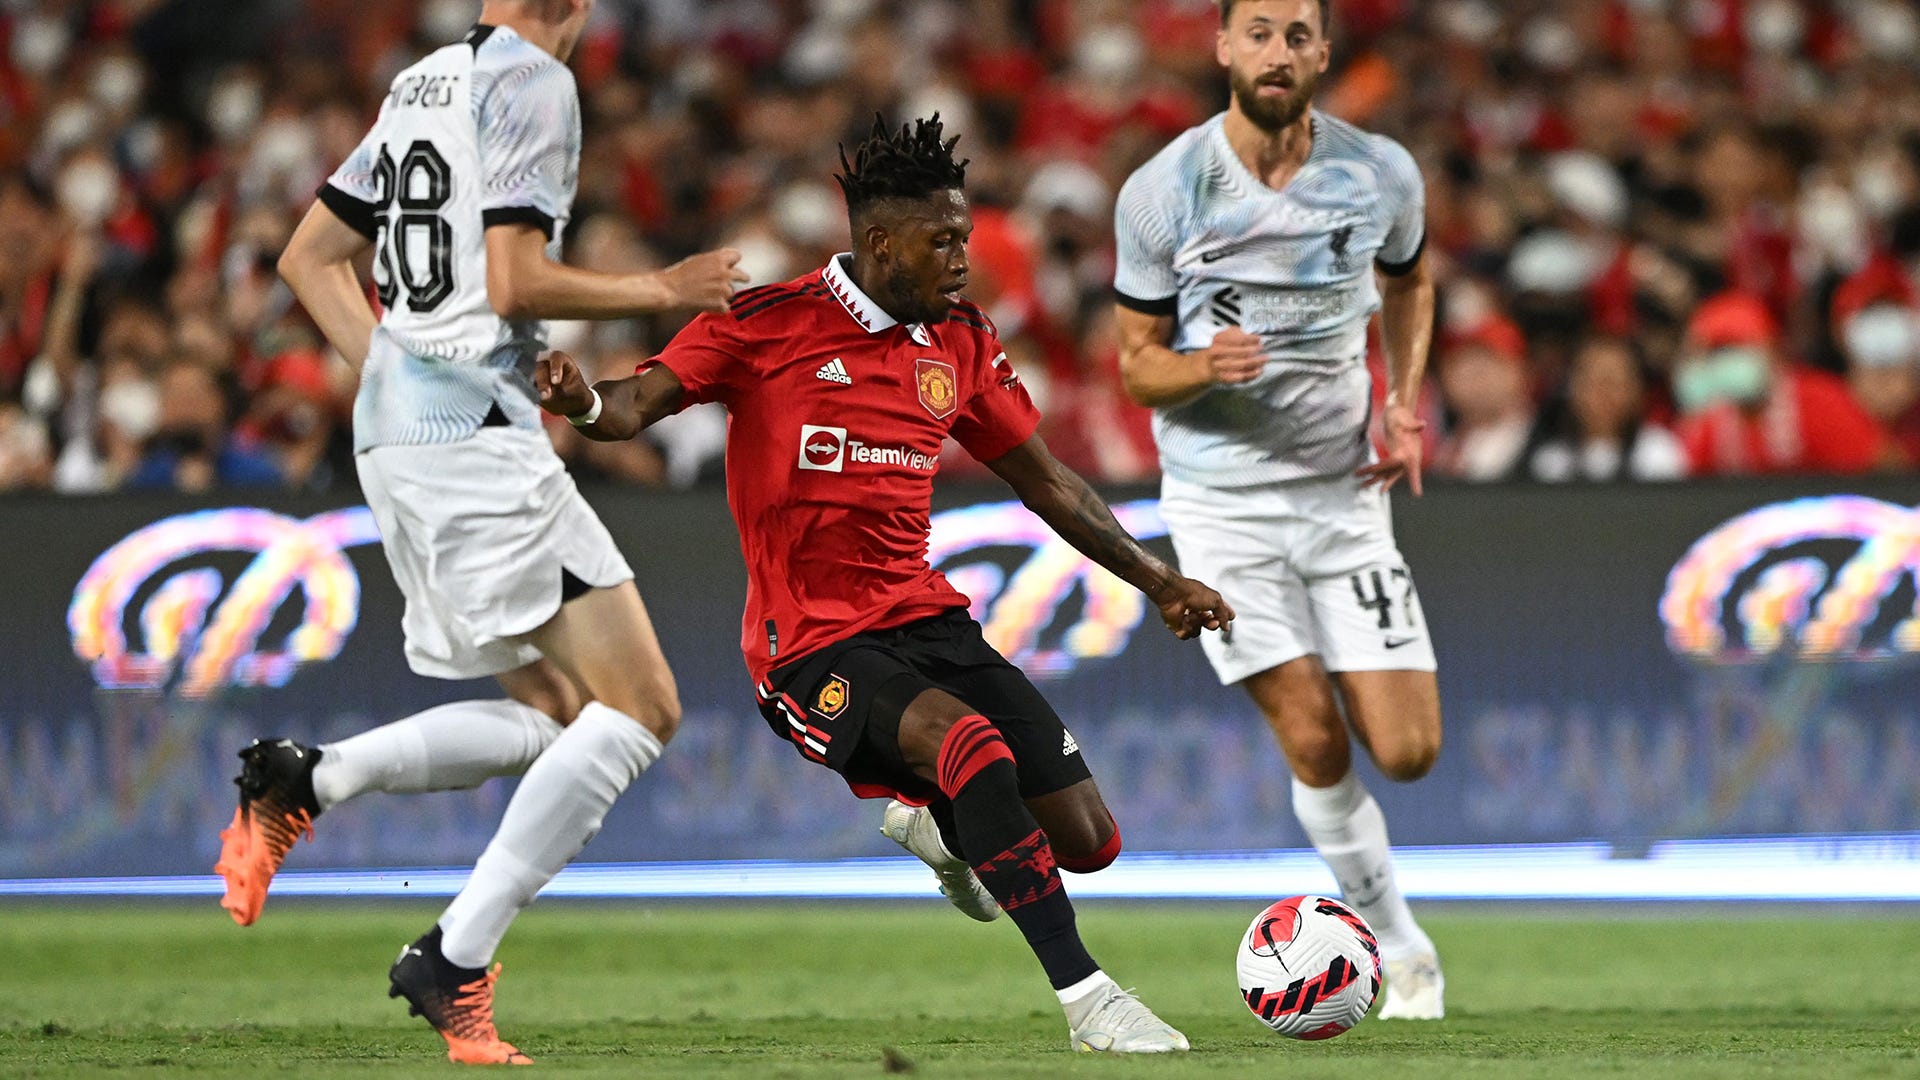 How to watch Melbourne Victory vs Manchester United from India - TV channel, live stream & team news | Goal.com India